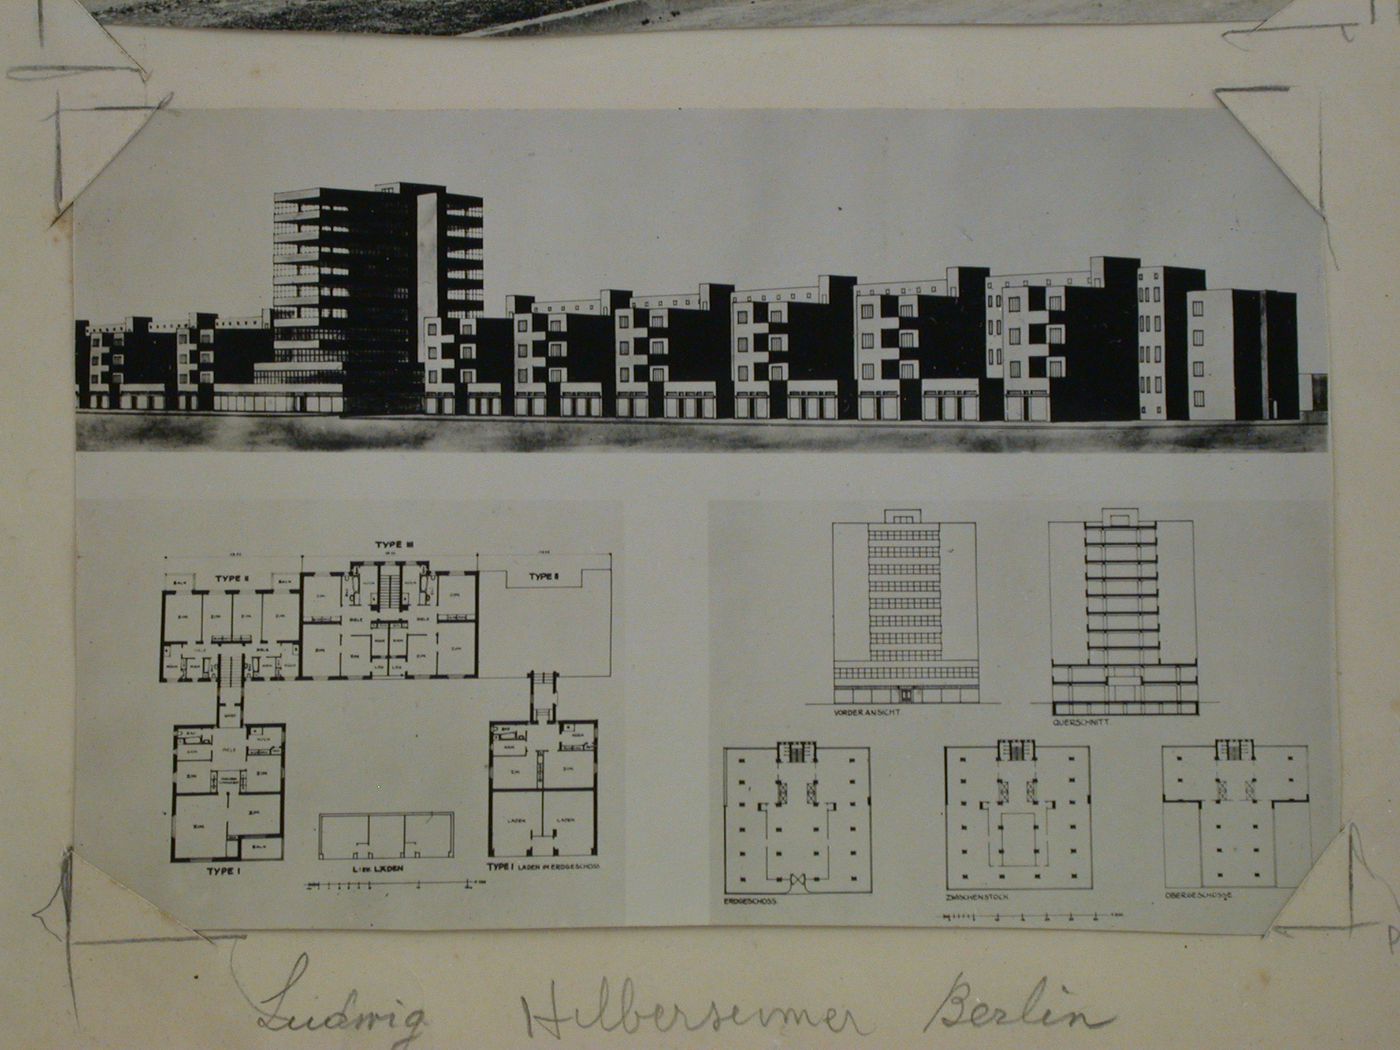 Photograph of drawings for a tenement building block, Stuttgart, Germany